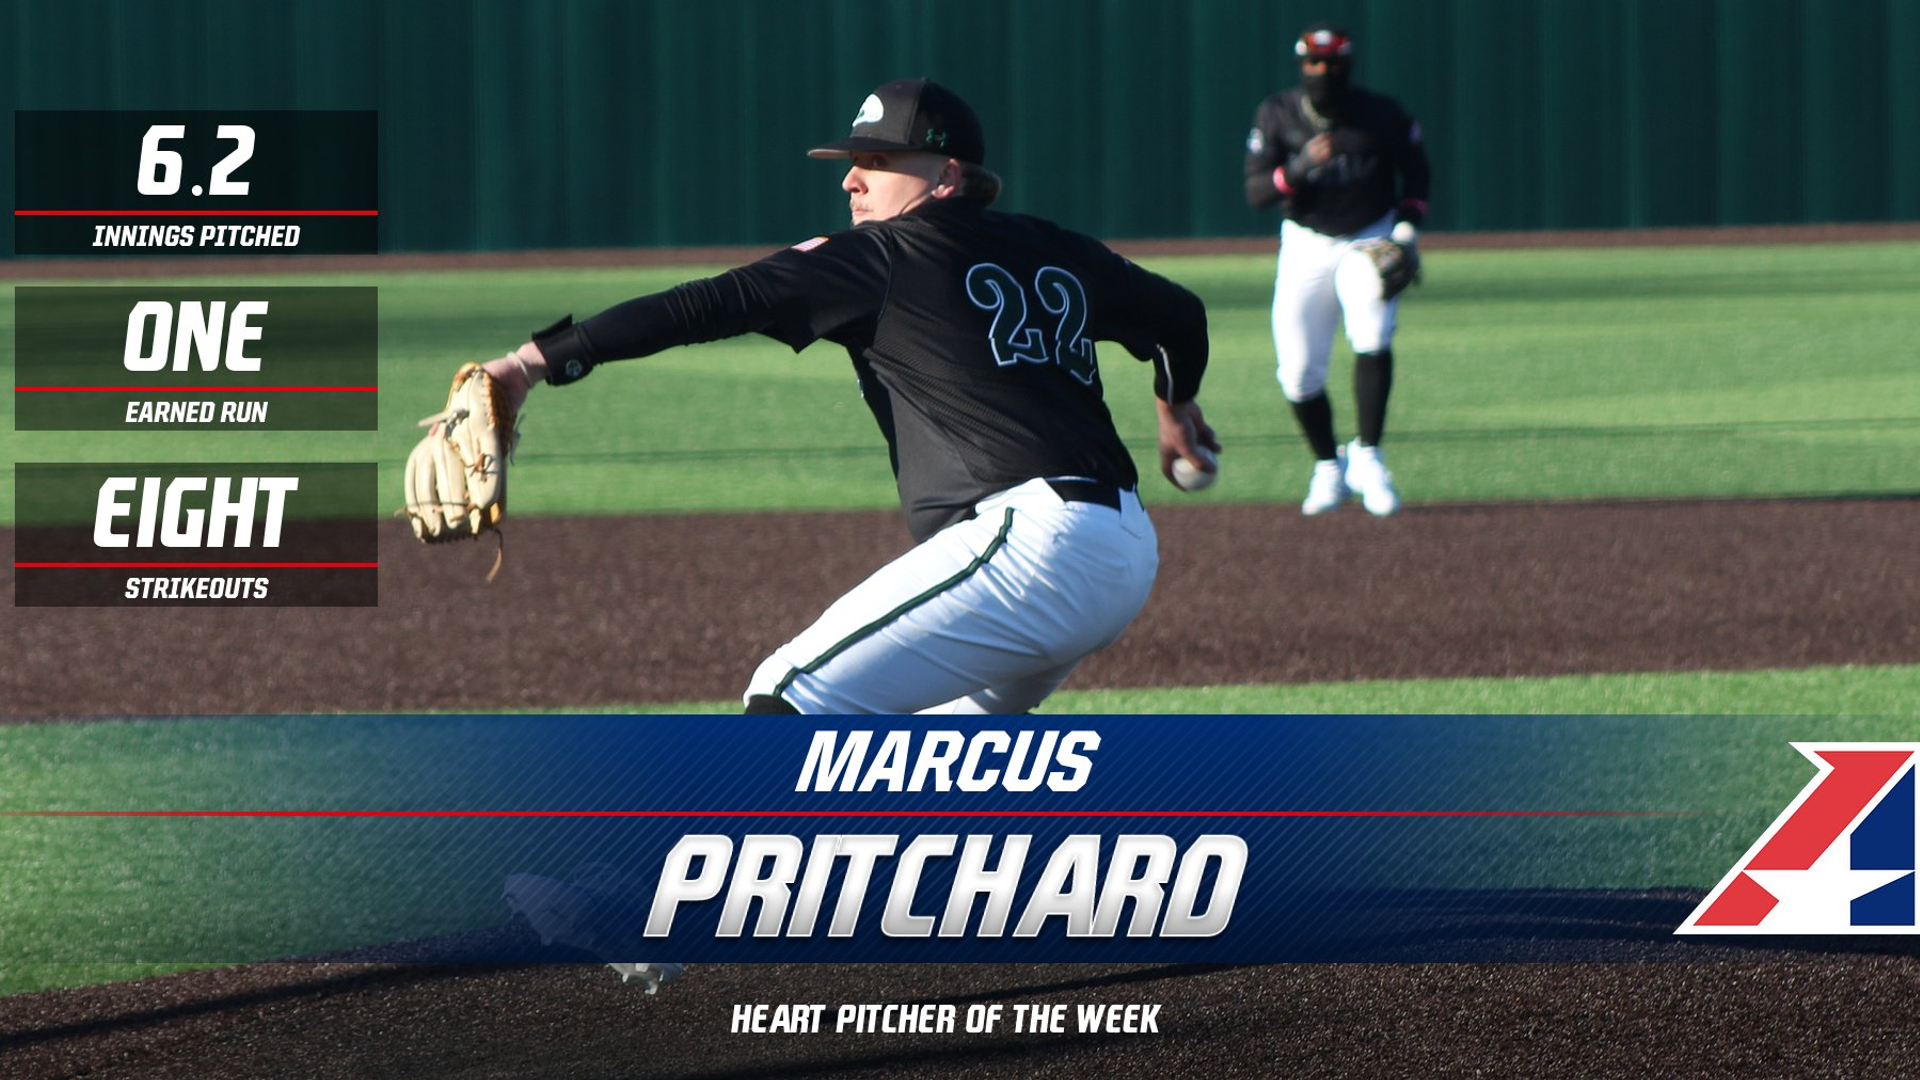 Pritchard Earns Heart Pitcher of the Week Honors